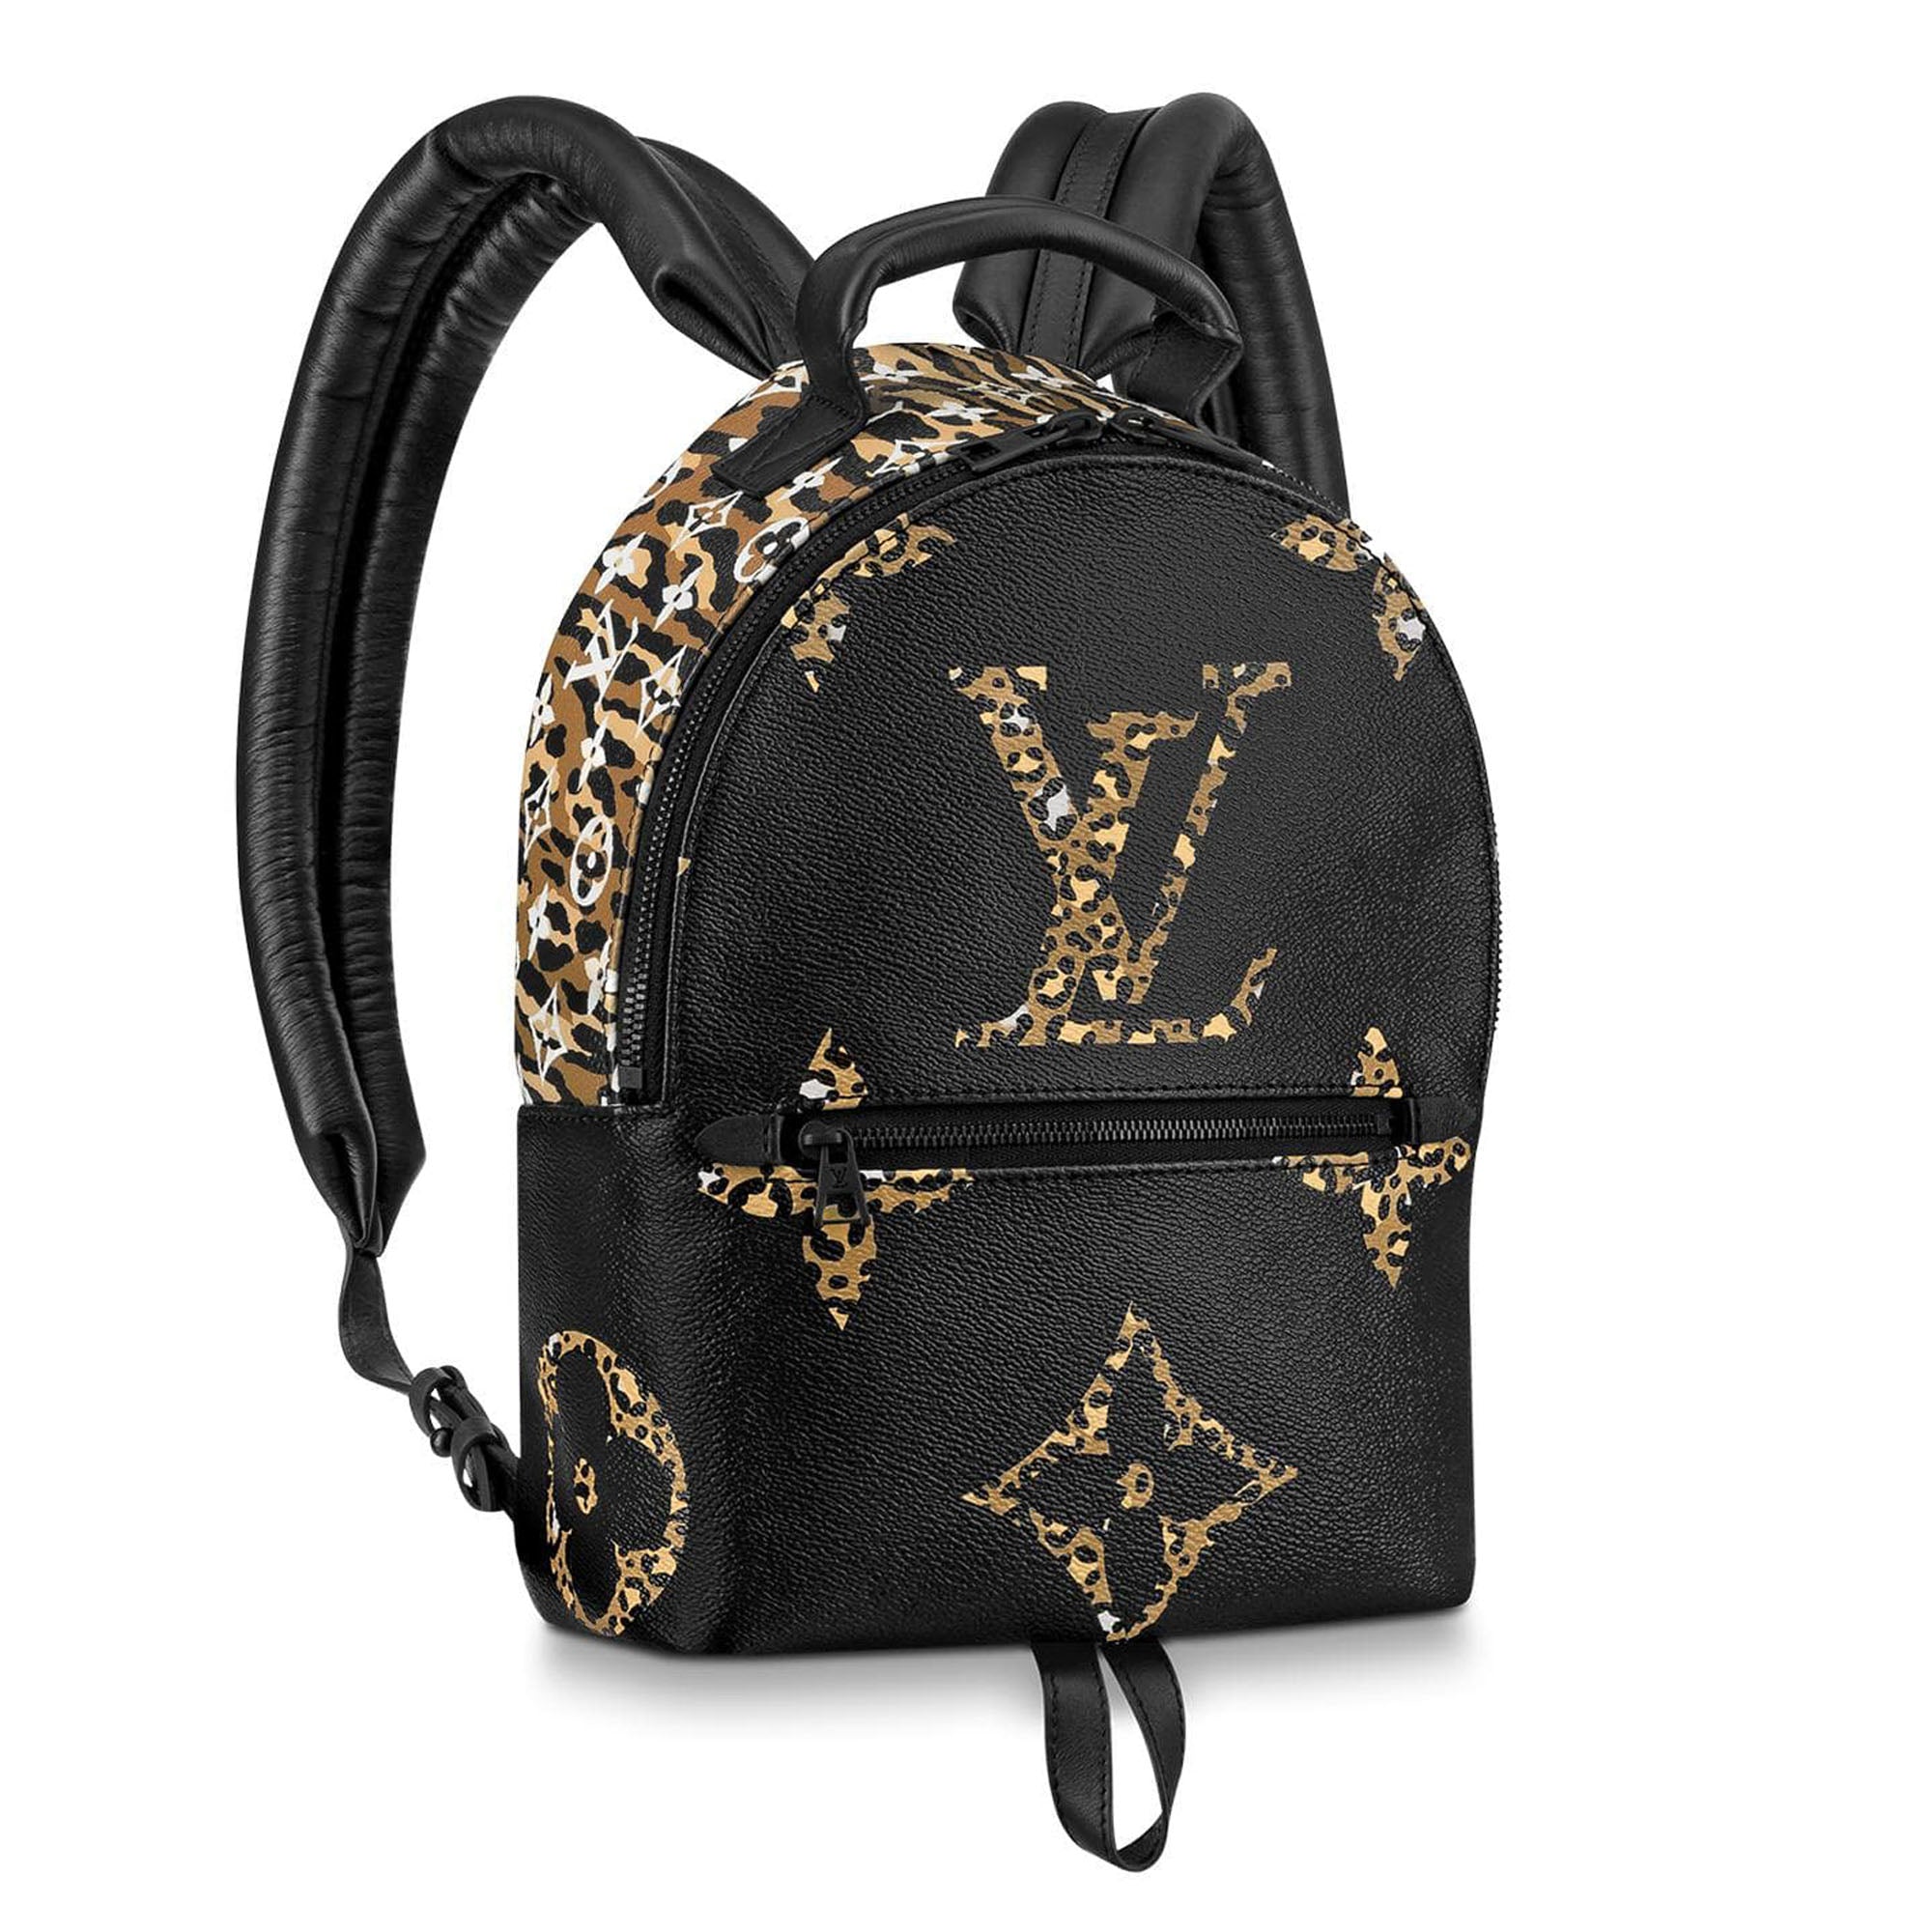 Louis Vuitton | Nigo Multiple Wallet | N60396 by The-Collectory